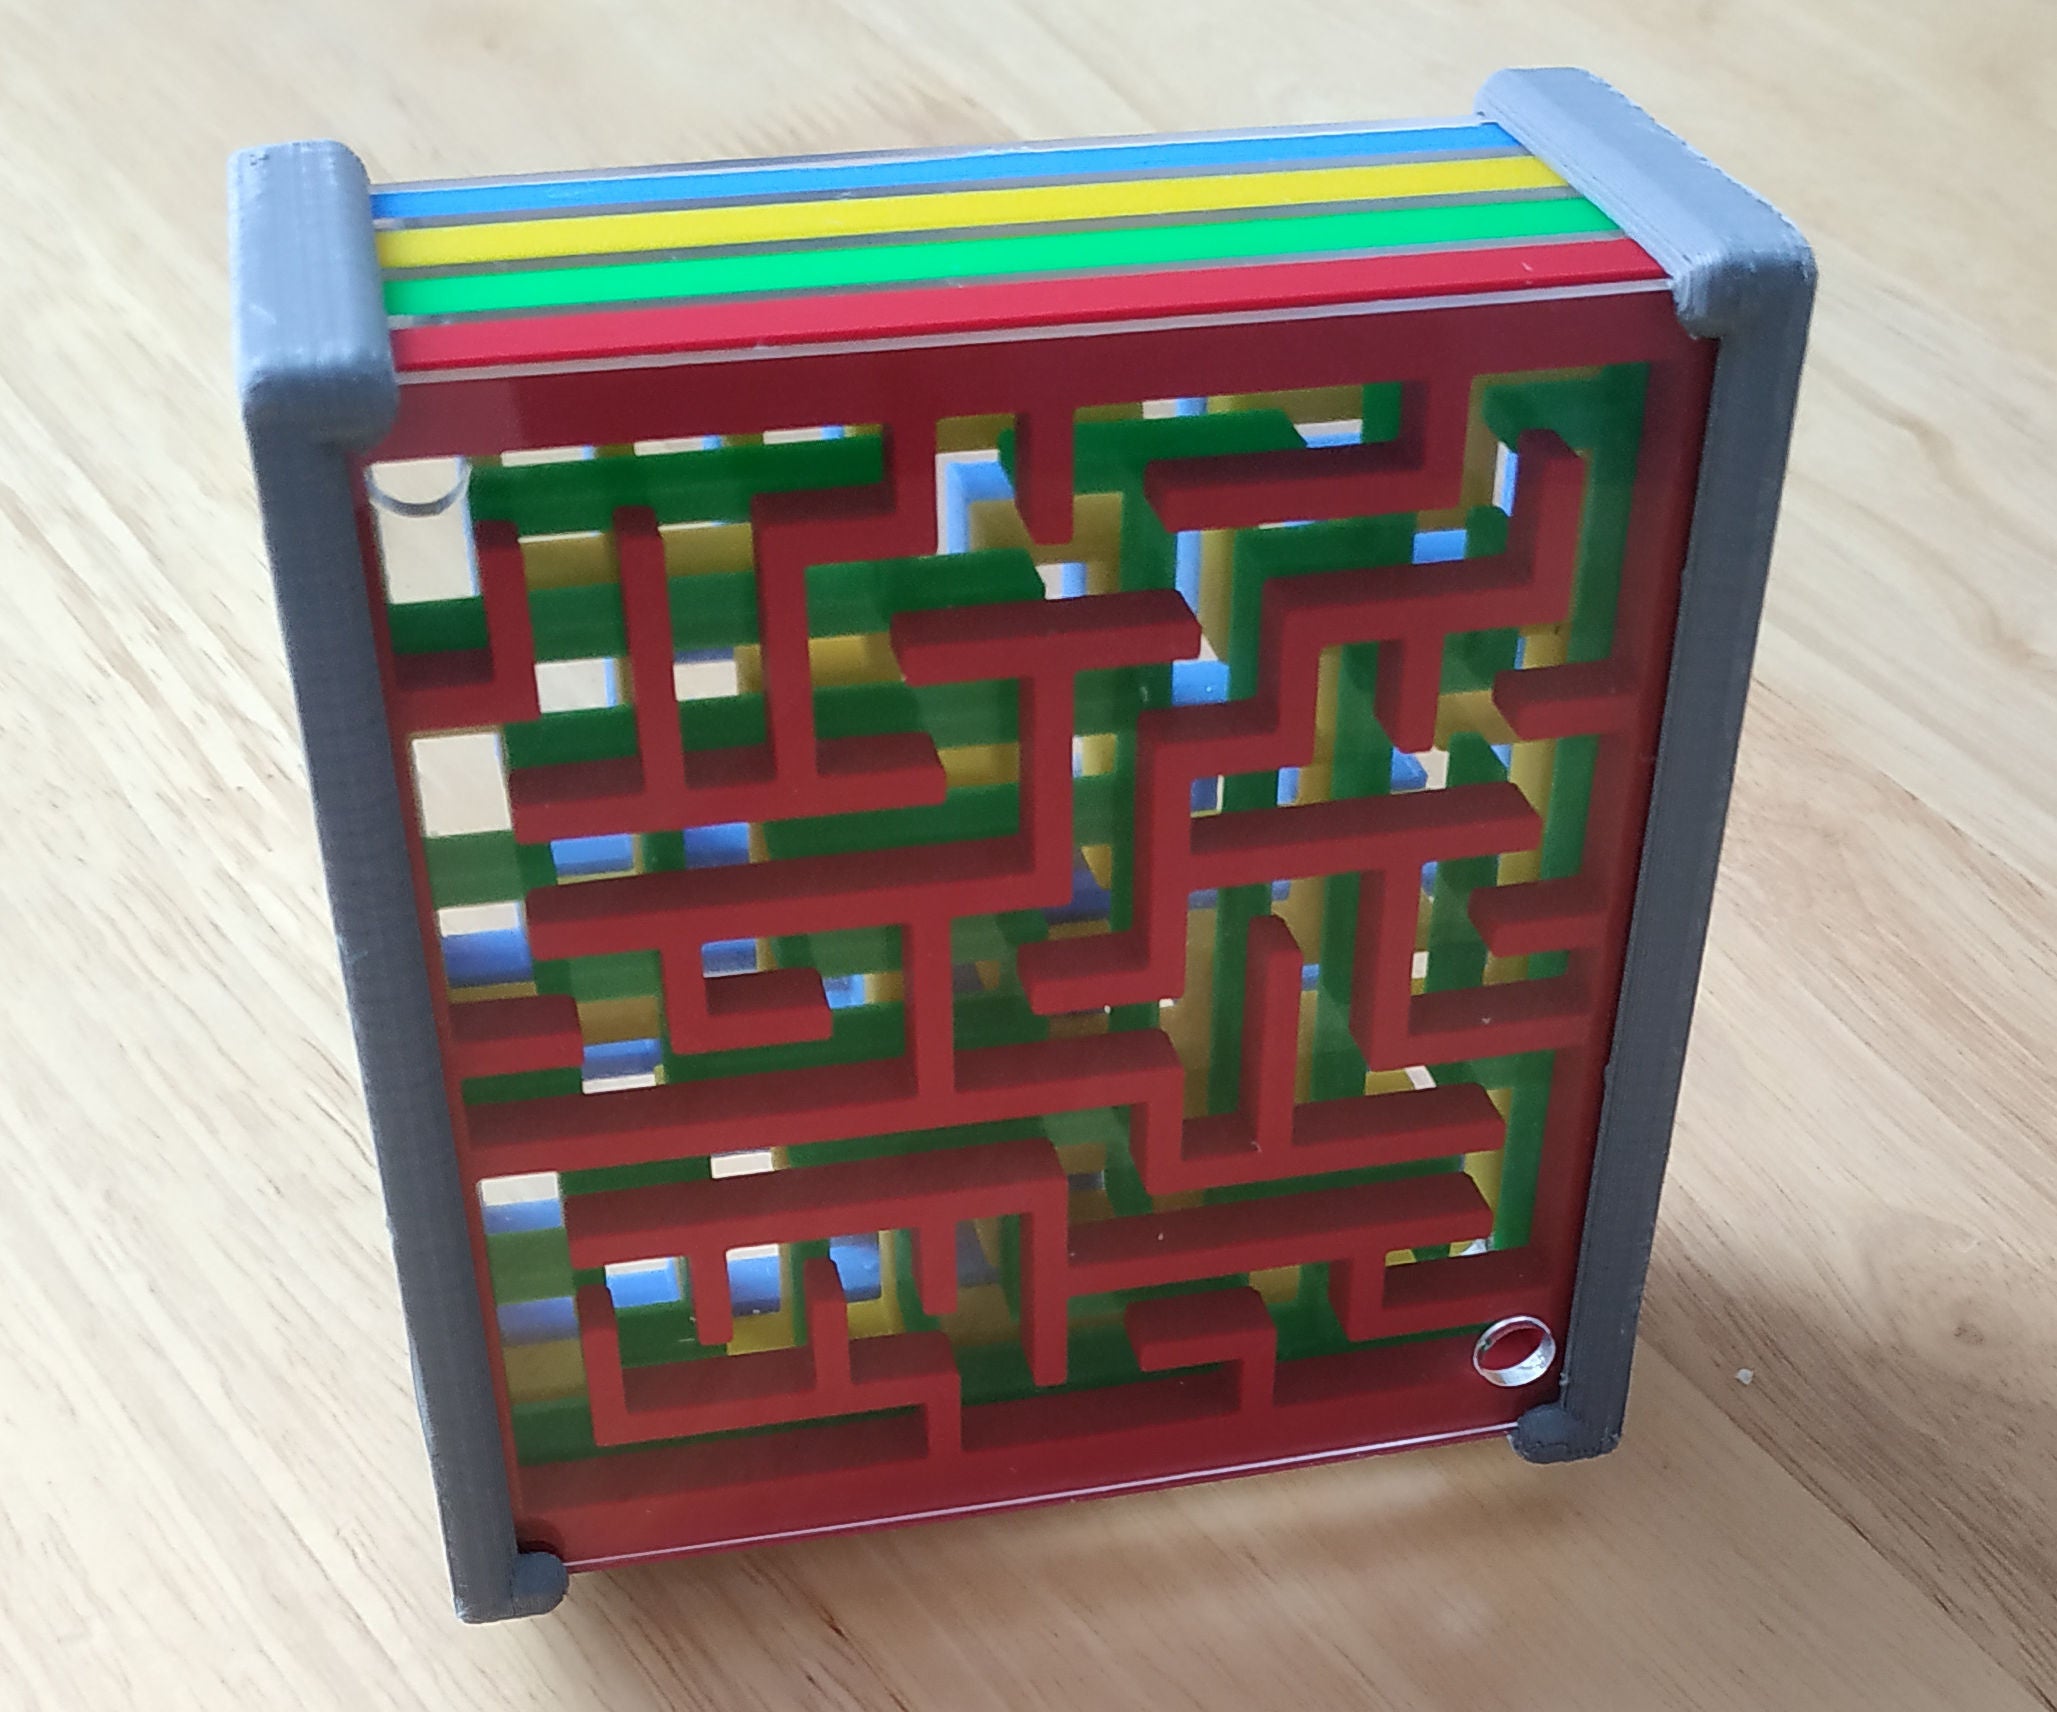 Stacked Ball-in-the-Maze Puzzles